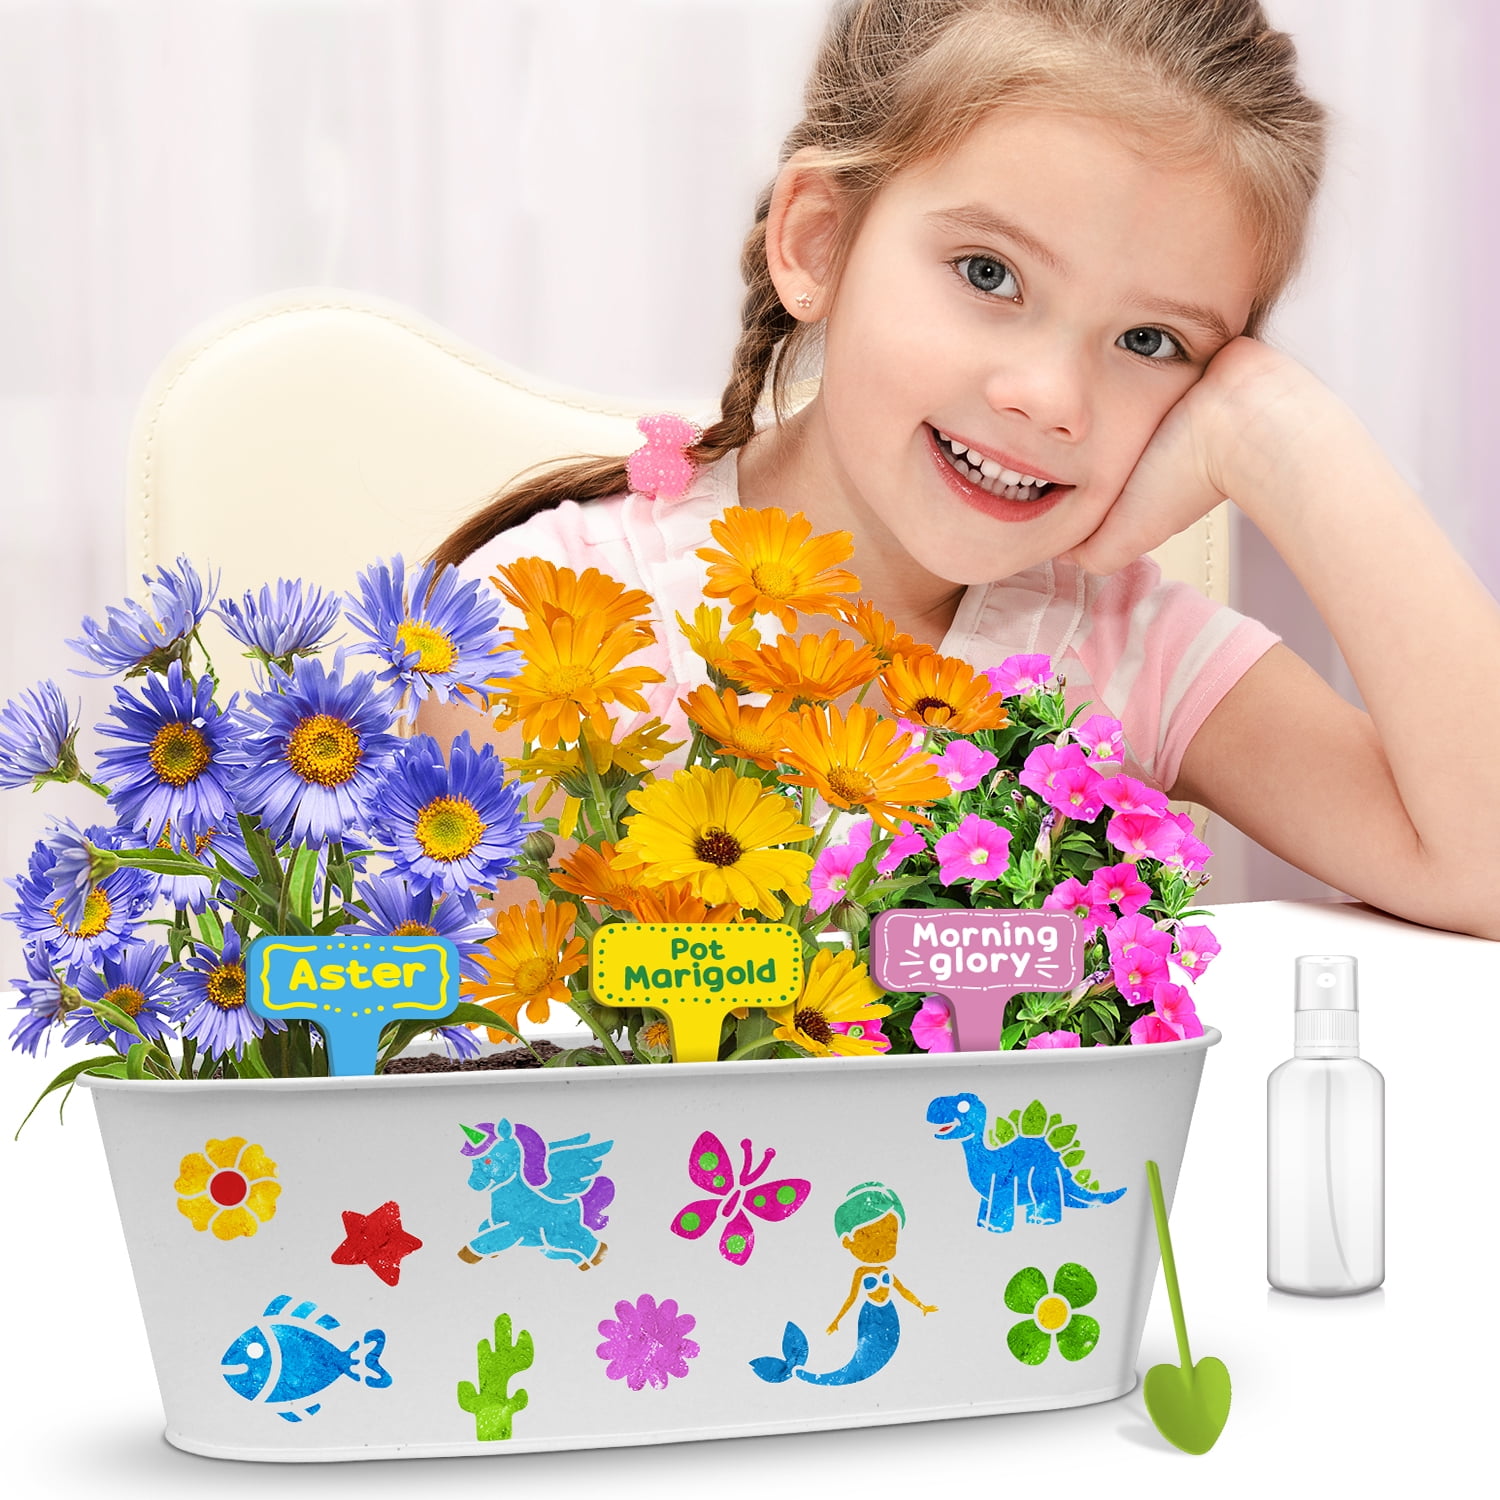 4 Set Paint & Plant Ceramic Flower Gardening Kit - Crafts for Girls Ages  8-12, Arts and Crafts for Kids Ages 8-12, Art Supplies for Kids, Toys  Birthday Gifts for Girls Boys Ages 4 5 6 7 8 9 10 11 12